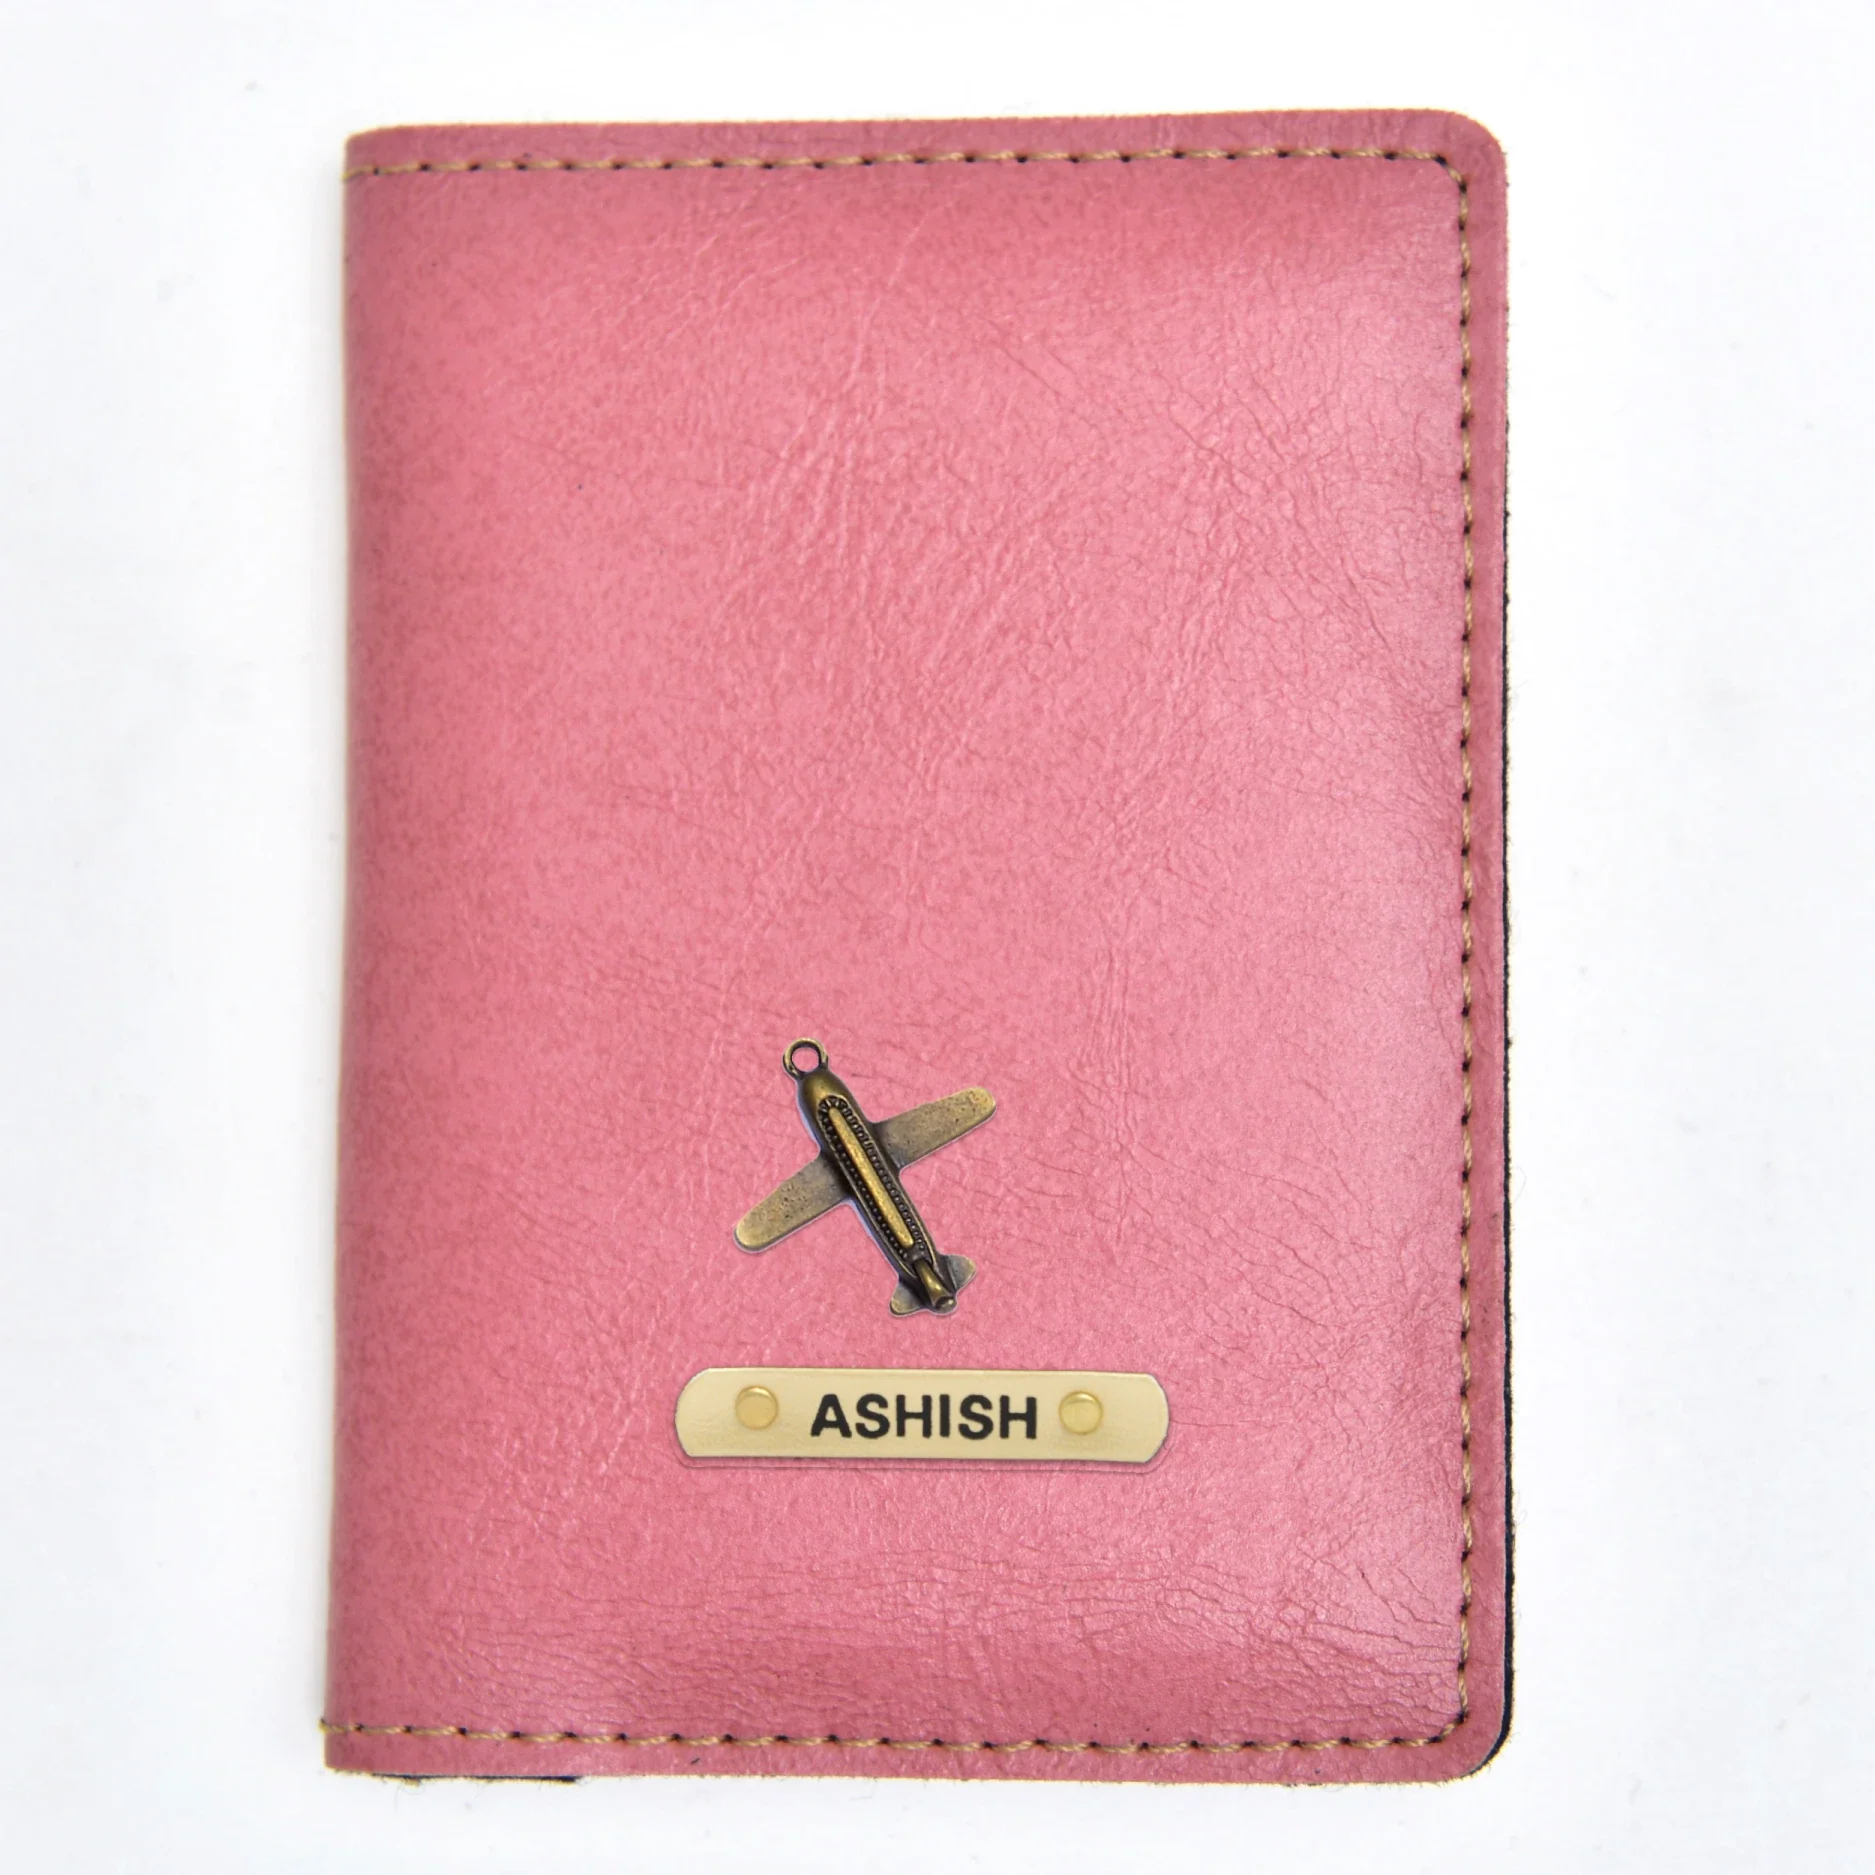 Enhance your travel experience with a personalized leather passport case that combines practicality and elegance.